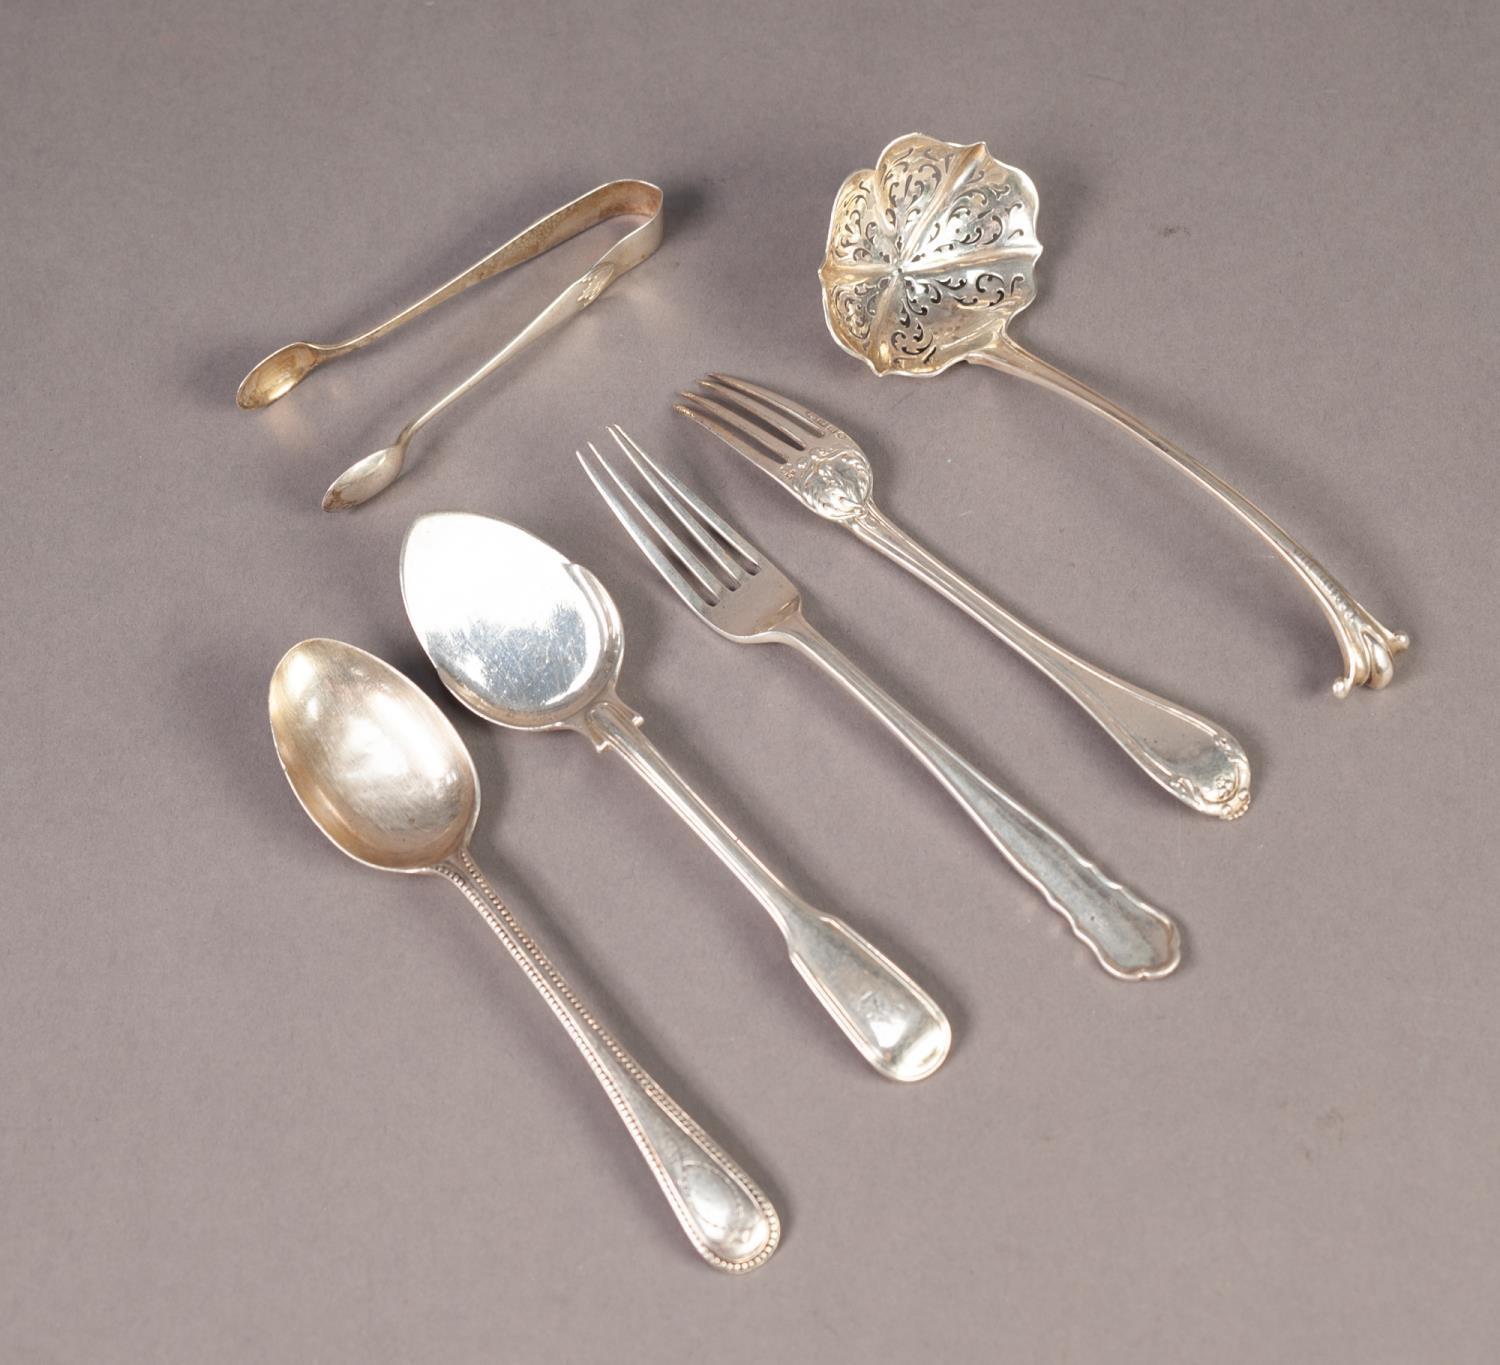 *VICTORIAN ONSLOW PATTERN SIFTING SPOON BY H.J. LIAS & SON, London 1852, together with a PAIR OF - Image 2 of 2